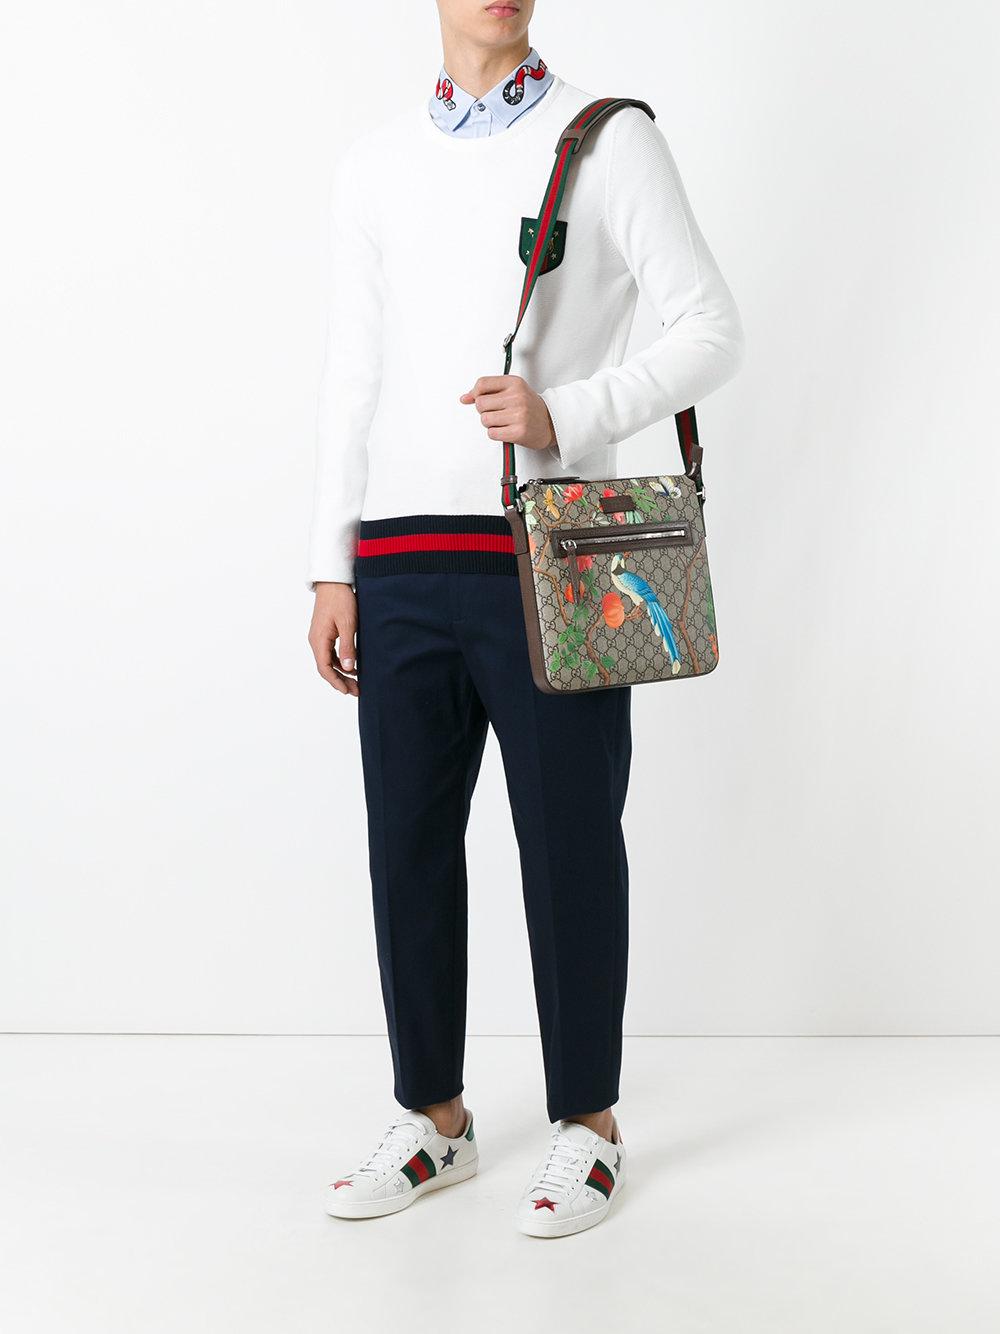 Lyst - Gucci Tian Gg Supreme Messenger Bag in Brown for Men